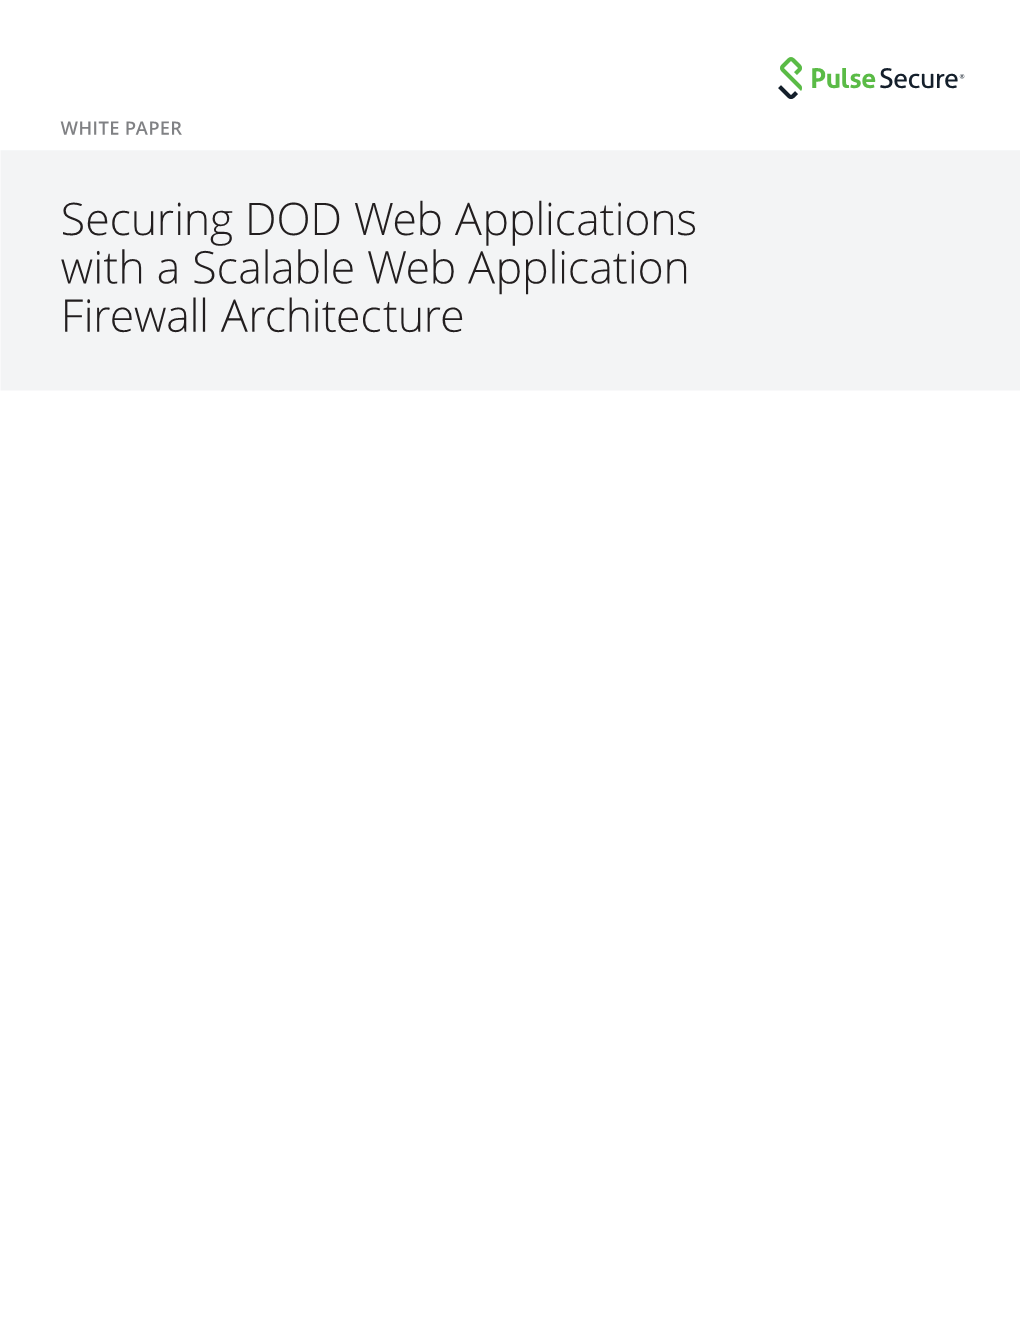 Securing DOD Web Applications with a Scalable Web